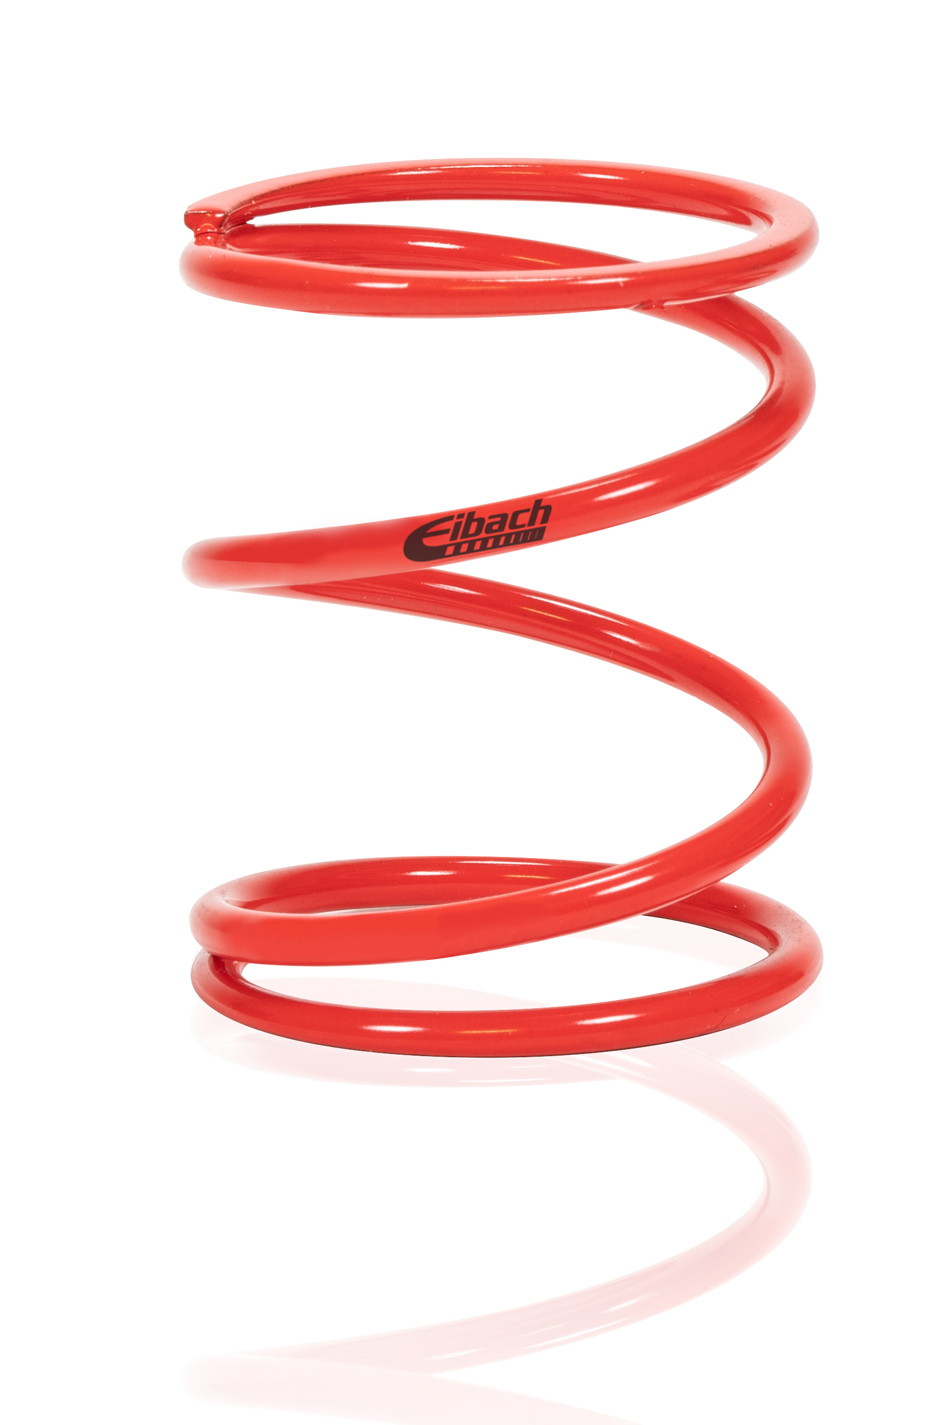 Eibach 0225.200.0075 Coil Spring, Barrel, Coil-Over, 1.360 in ID, 2.2500 in Length, 75 lb/in Spring Rate, Steel, Red Powder Coat, Each